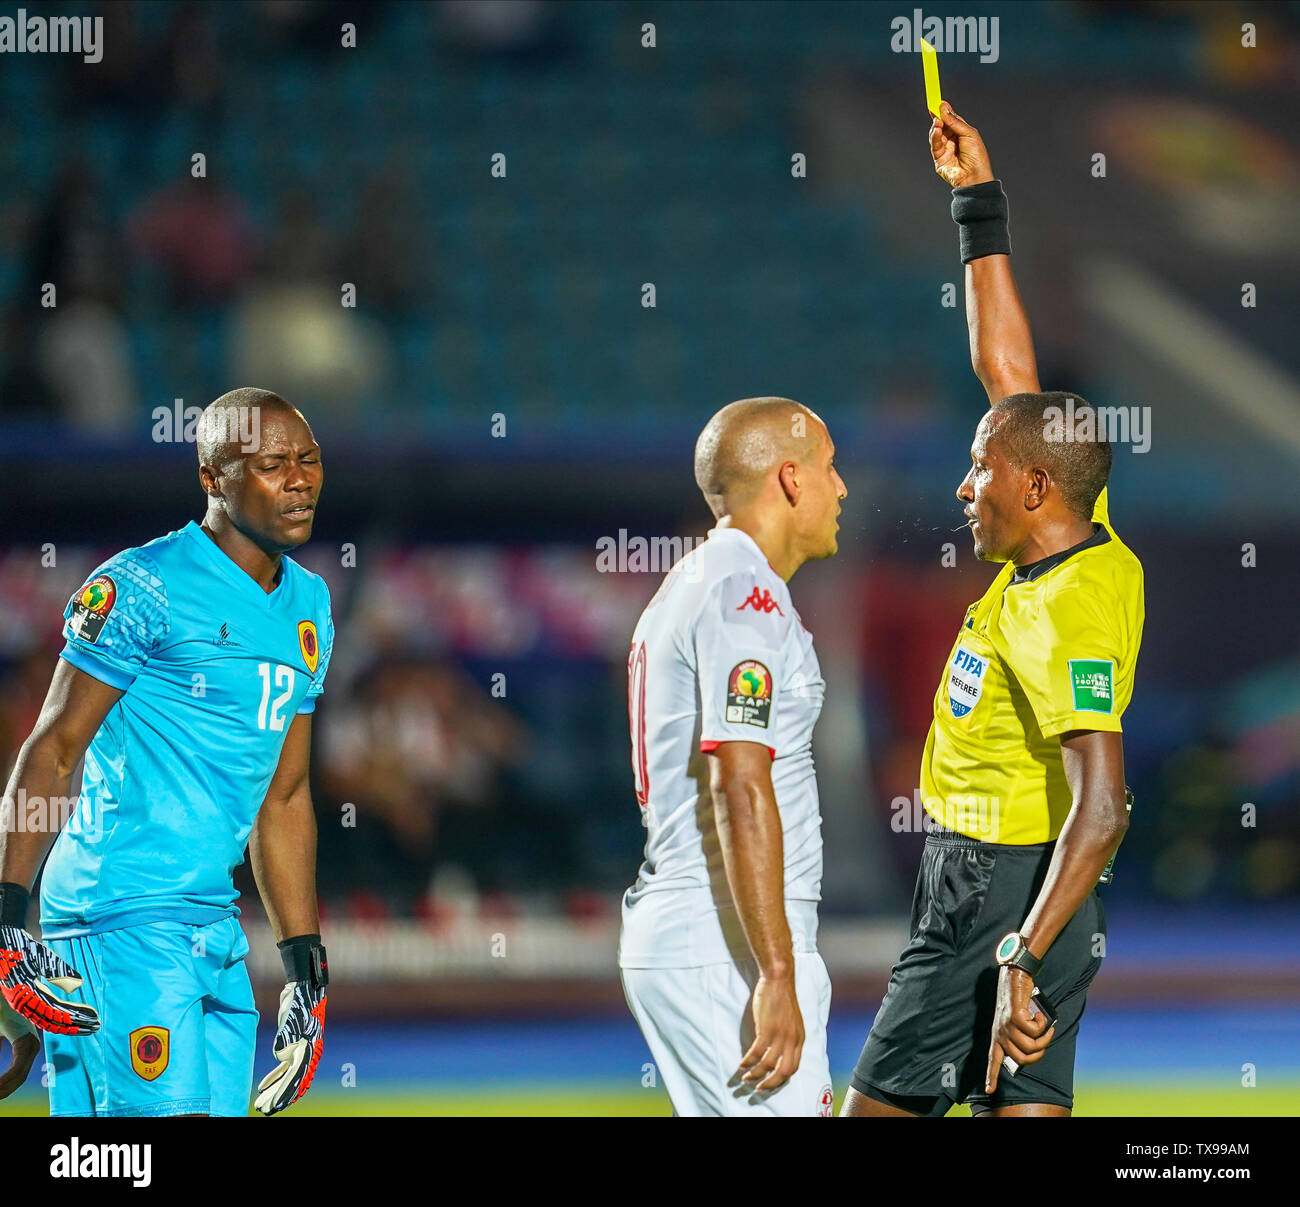 June 24, 2019: !a12! receiving a yellow card during the 2019 African Cup of Nations match between Tunisia and Angola at the Suez Army stadium in Suez, Egypt. Ulrik Pedersen/CSM. Stock Photo